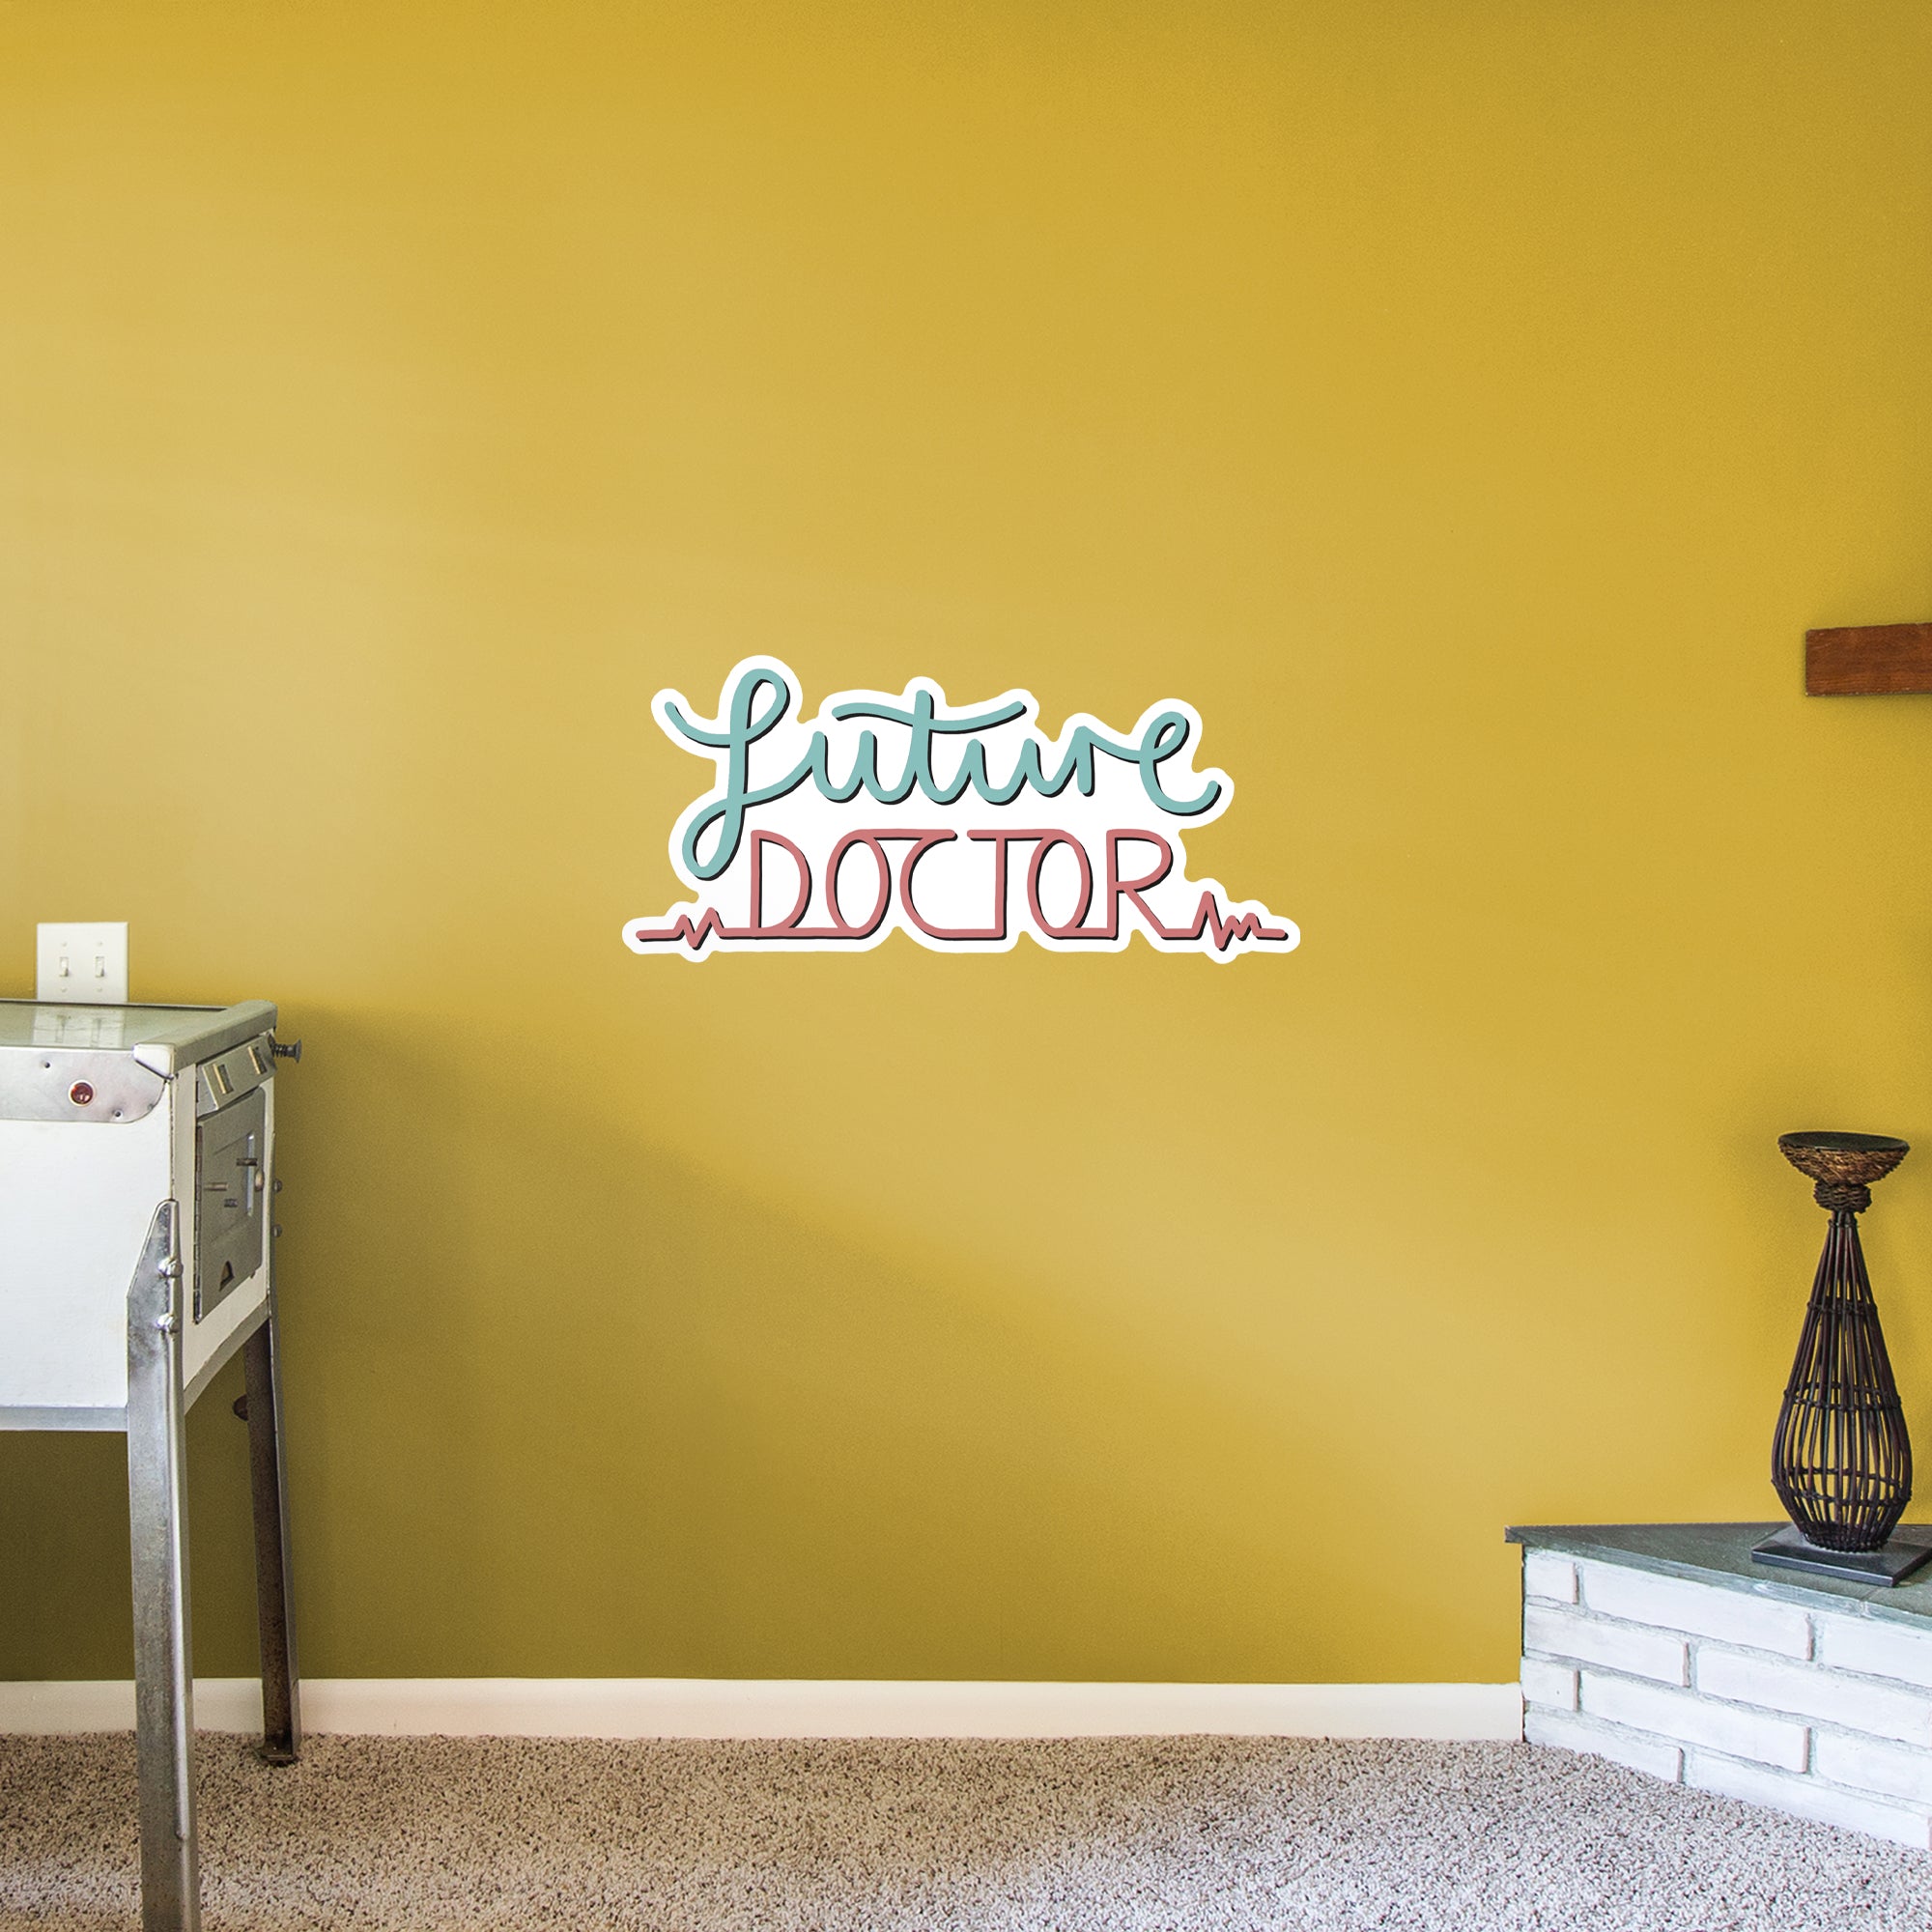 Future Doctor - Officially Licensed Big Moods Removable Wall Decal XL by Fathead | Vinyl